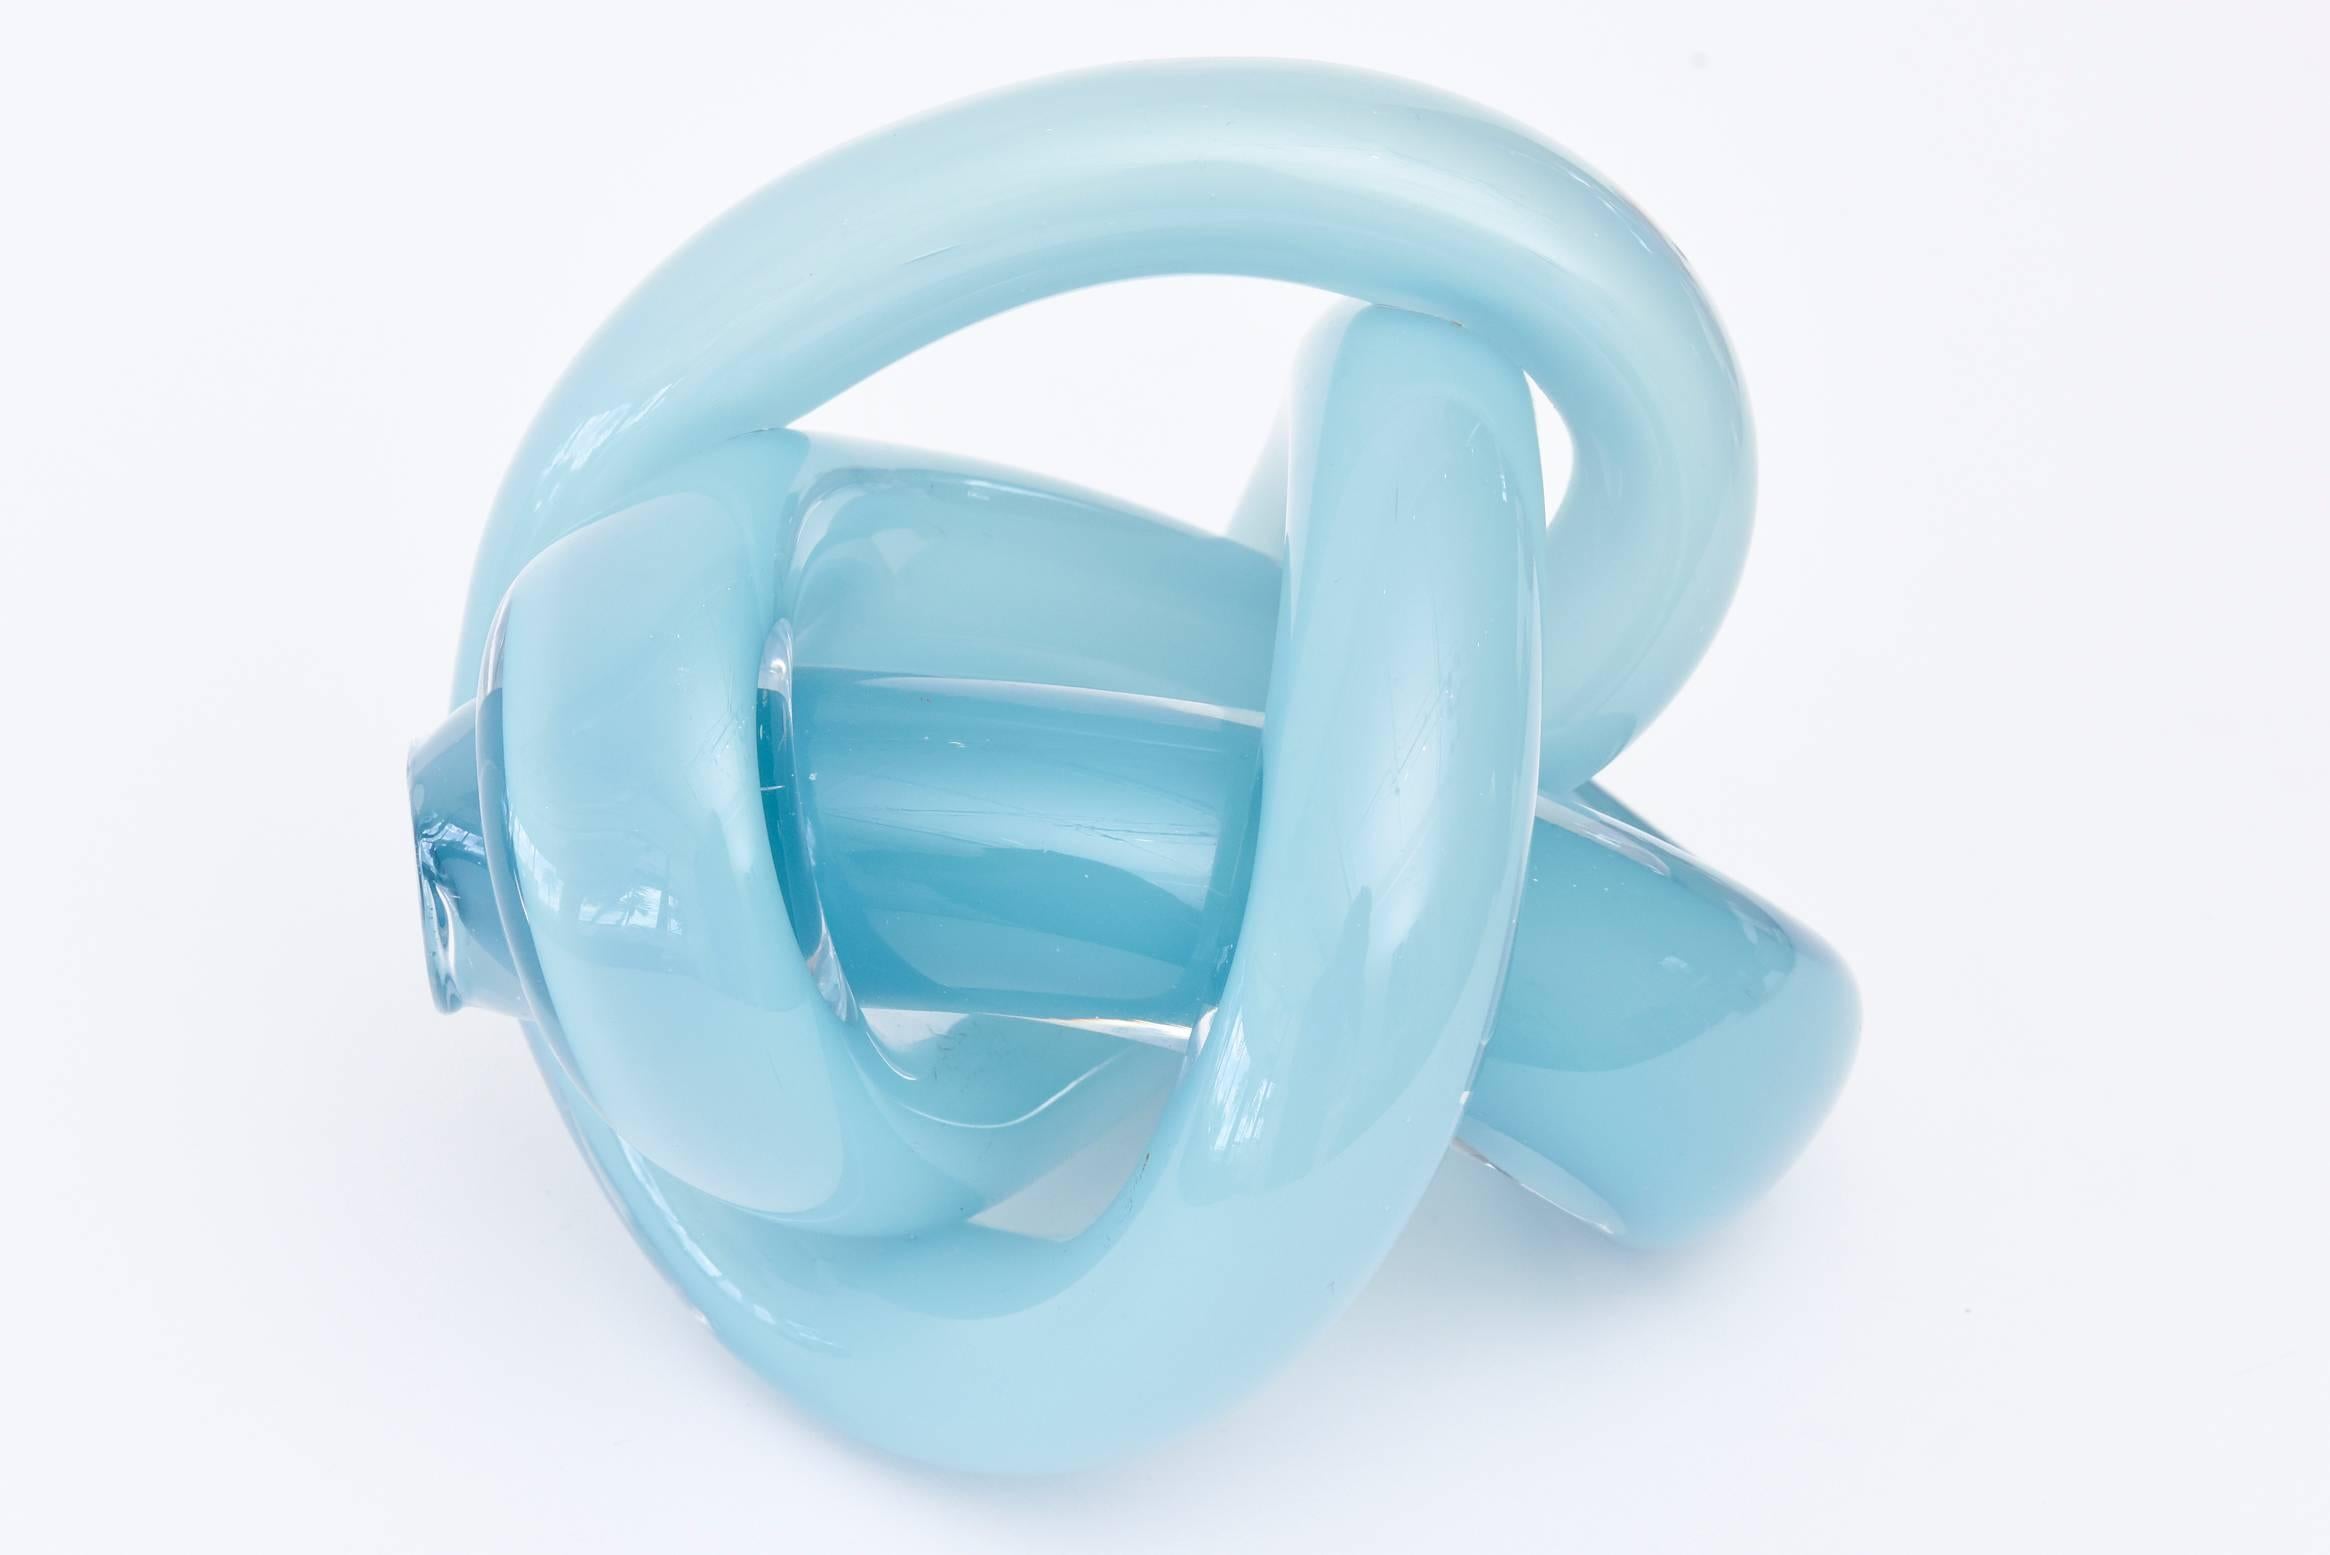 This twisted signed vintage hand blown glass sculpture is organic meets modern glass. The color is a gorgeous sexy aqua and each way you turn it, it is a different perspective of twisted hand blown glass. It is from the 1970s and is signed but not